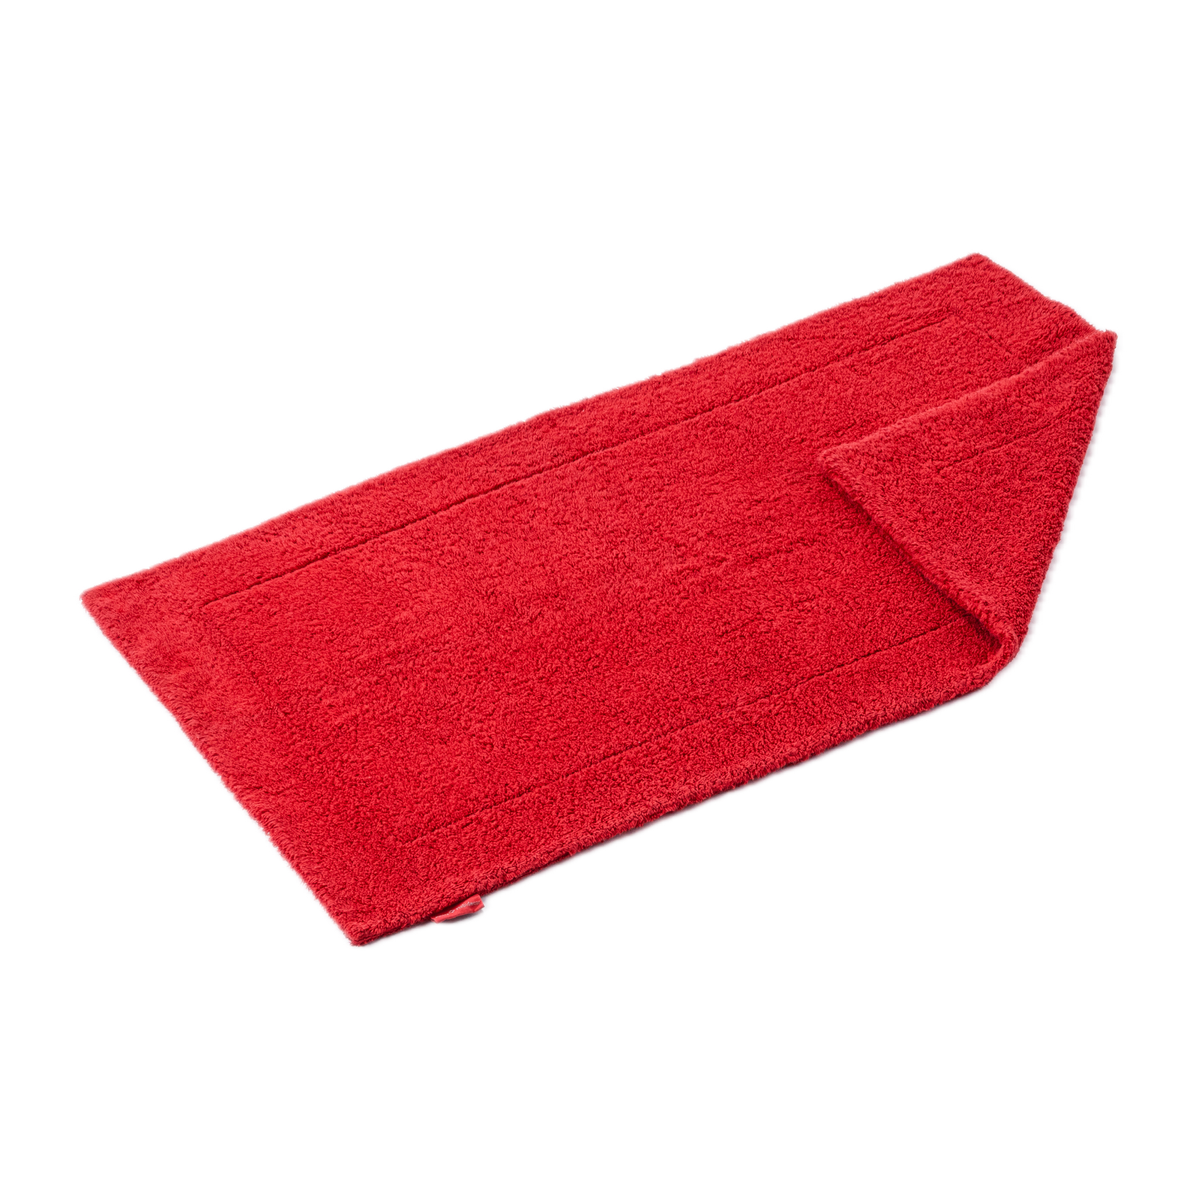 Slanted Image of Abyss Double Bath Tub Mat in Carmin (564) Color with Fold